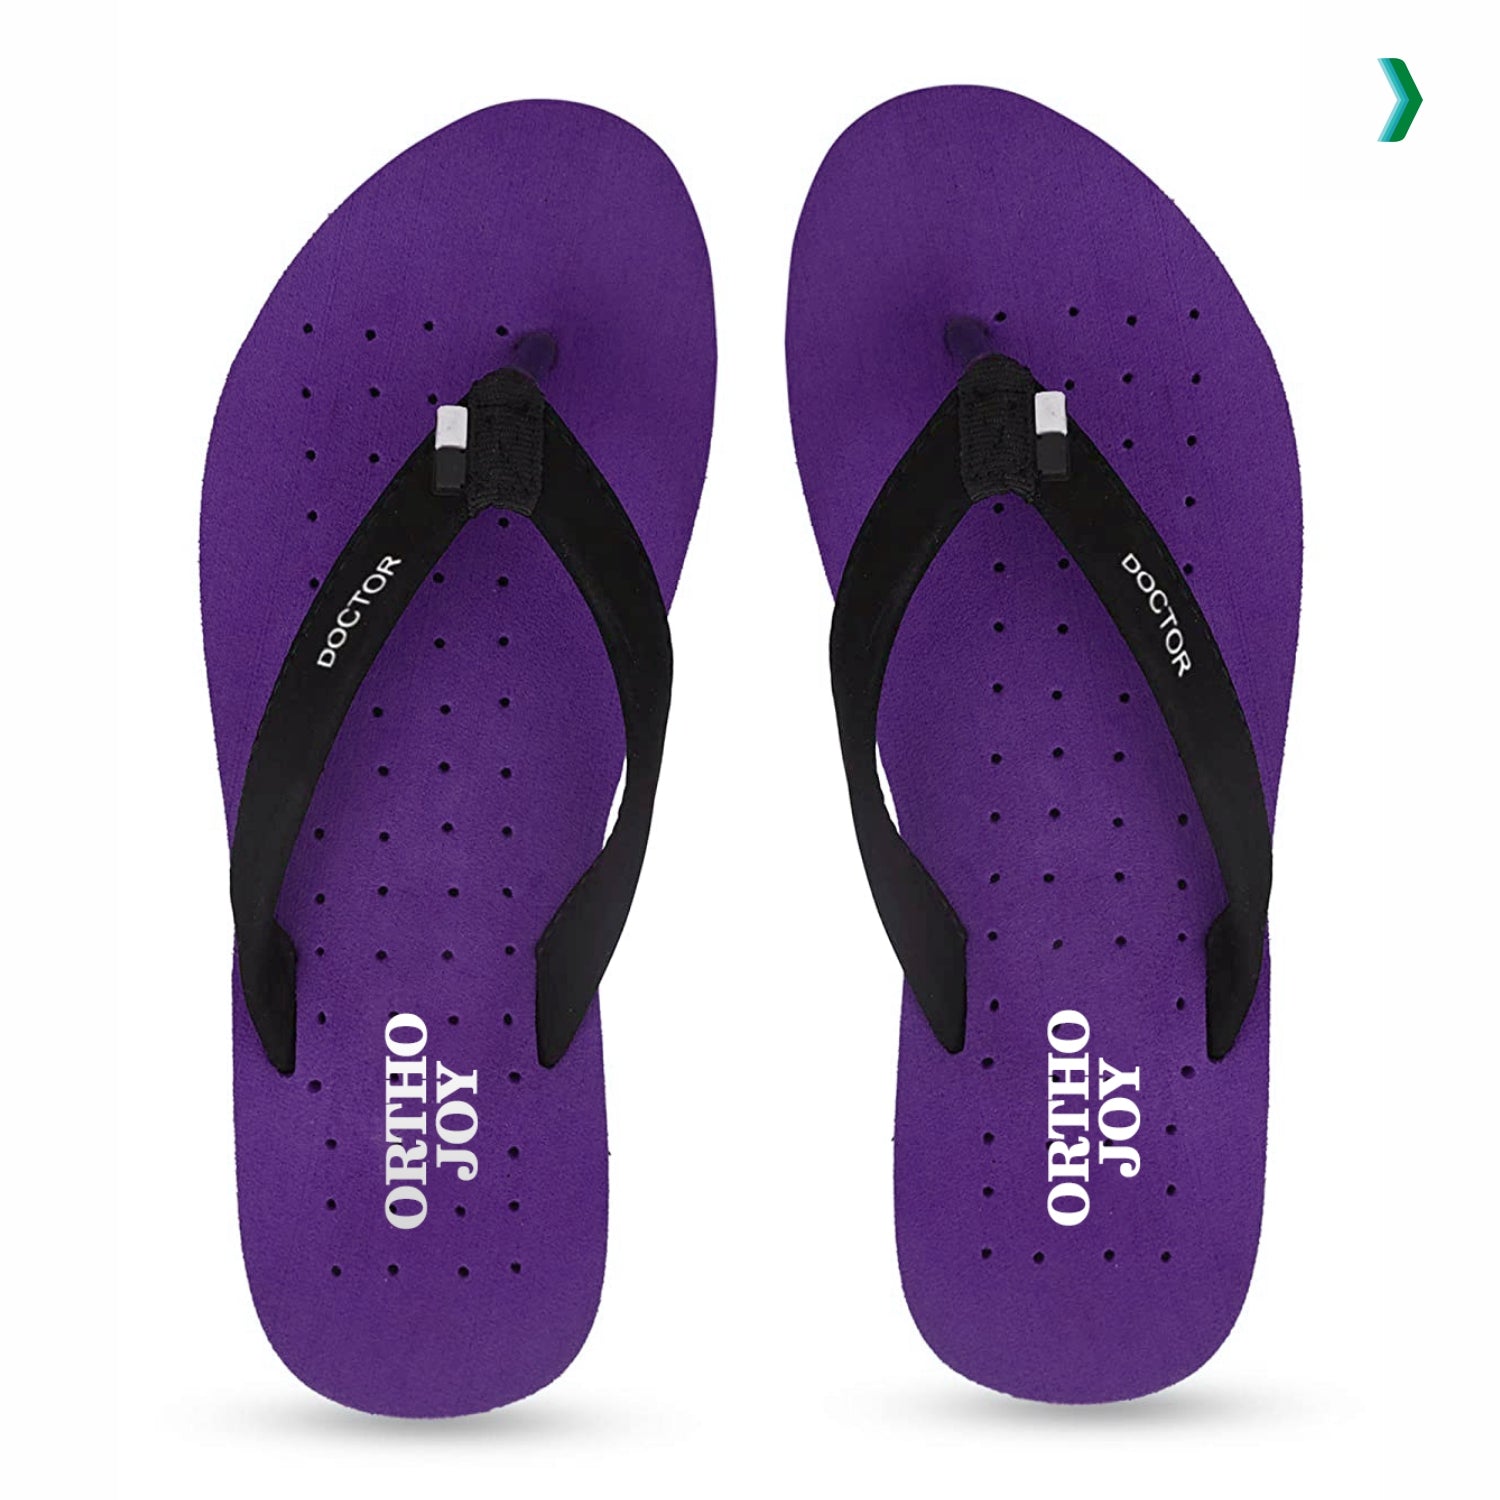 ortho chappal for ladies, ortho slippers for ladies